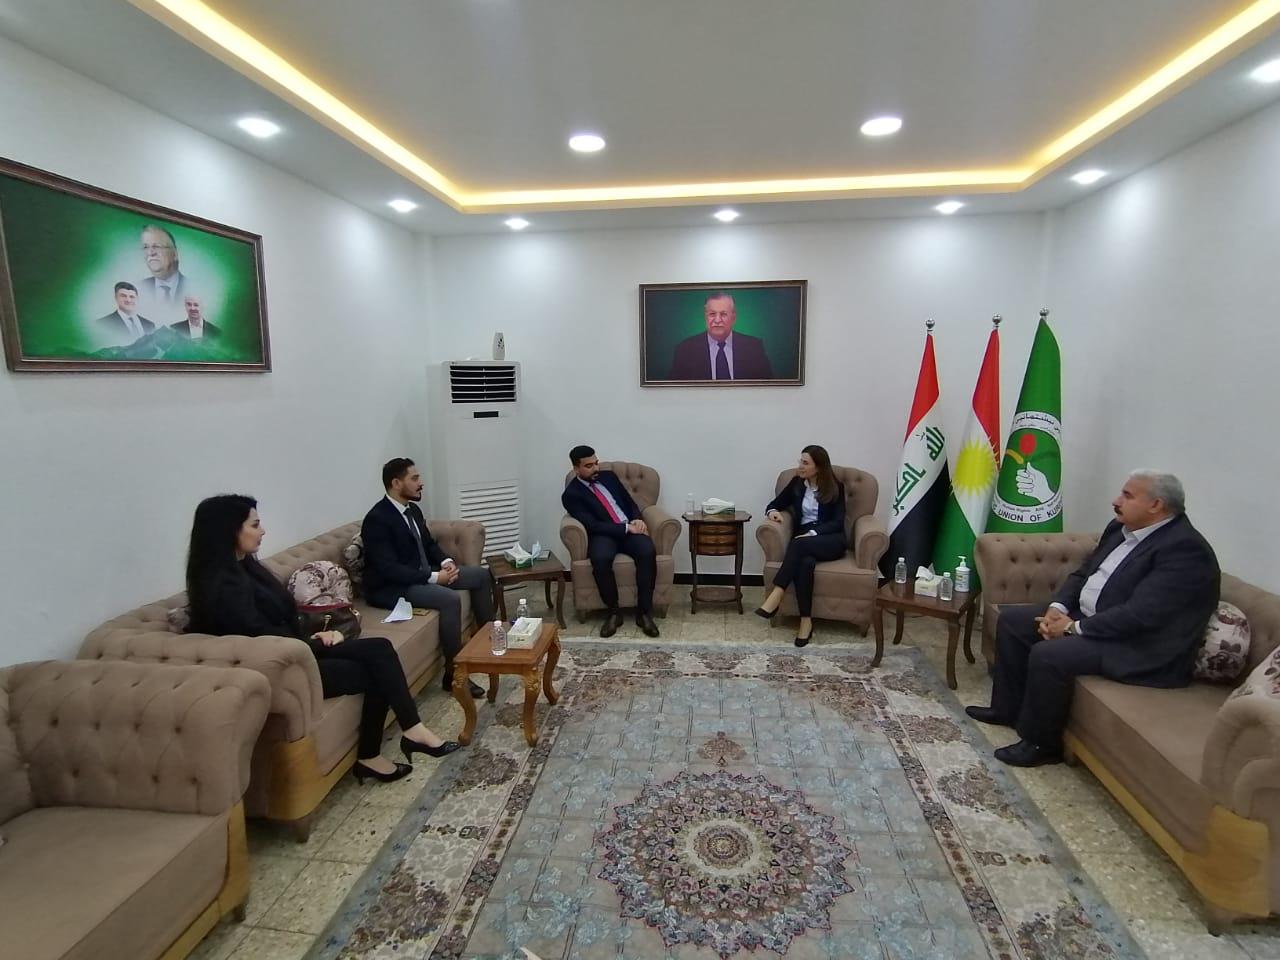 A delegation from Al Nasr Coalition visits the headquarters of the Patriotic Union of Kurdistan